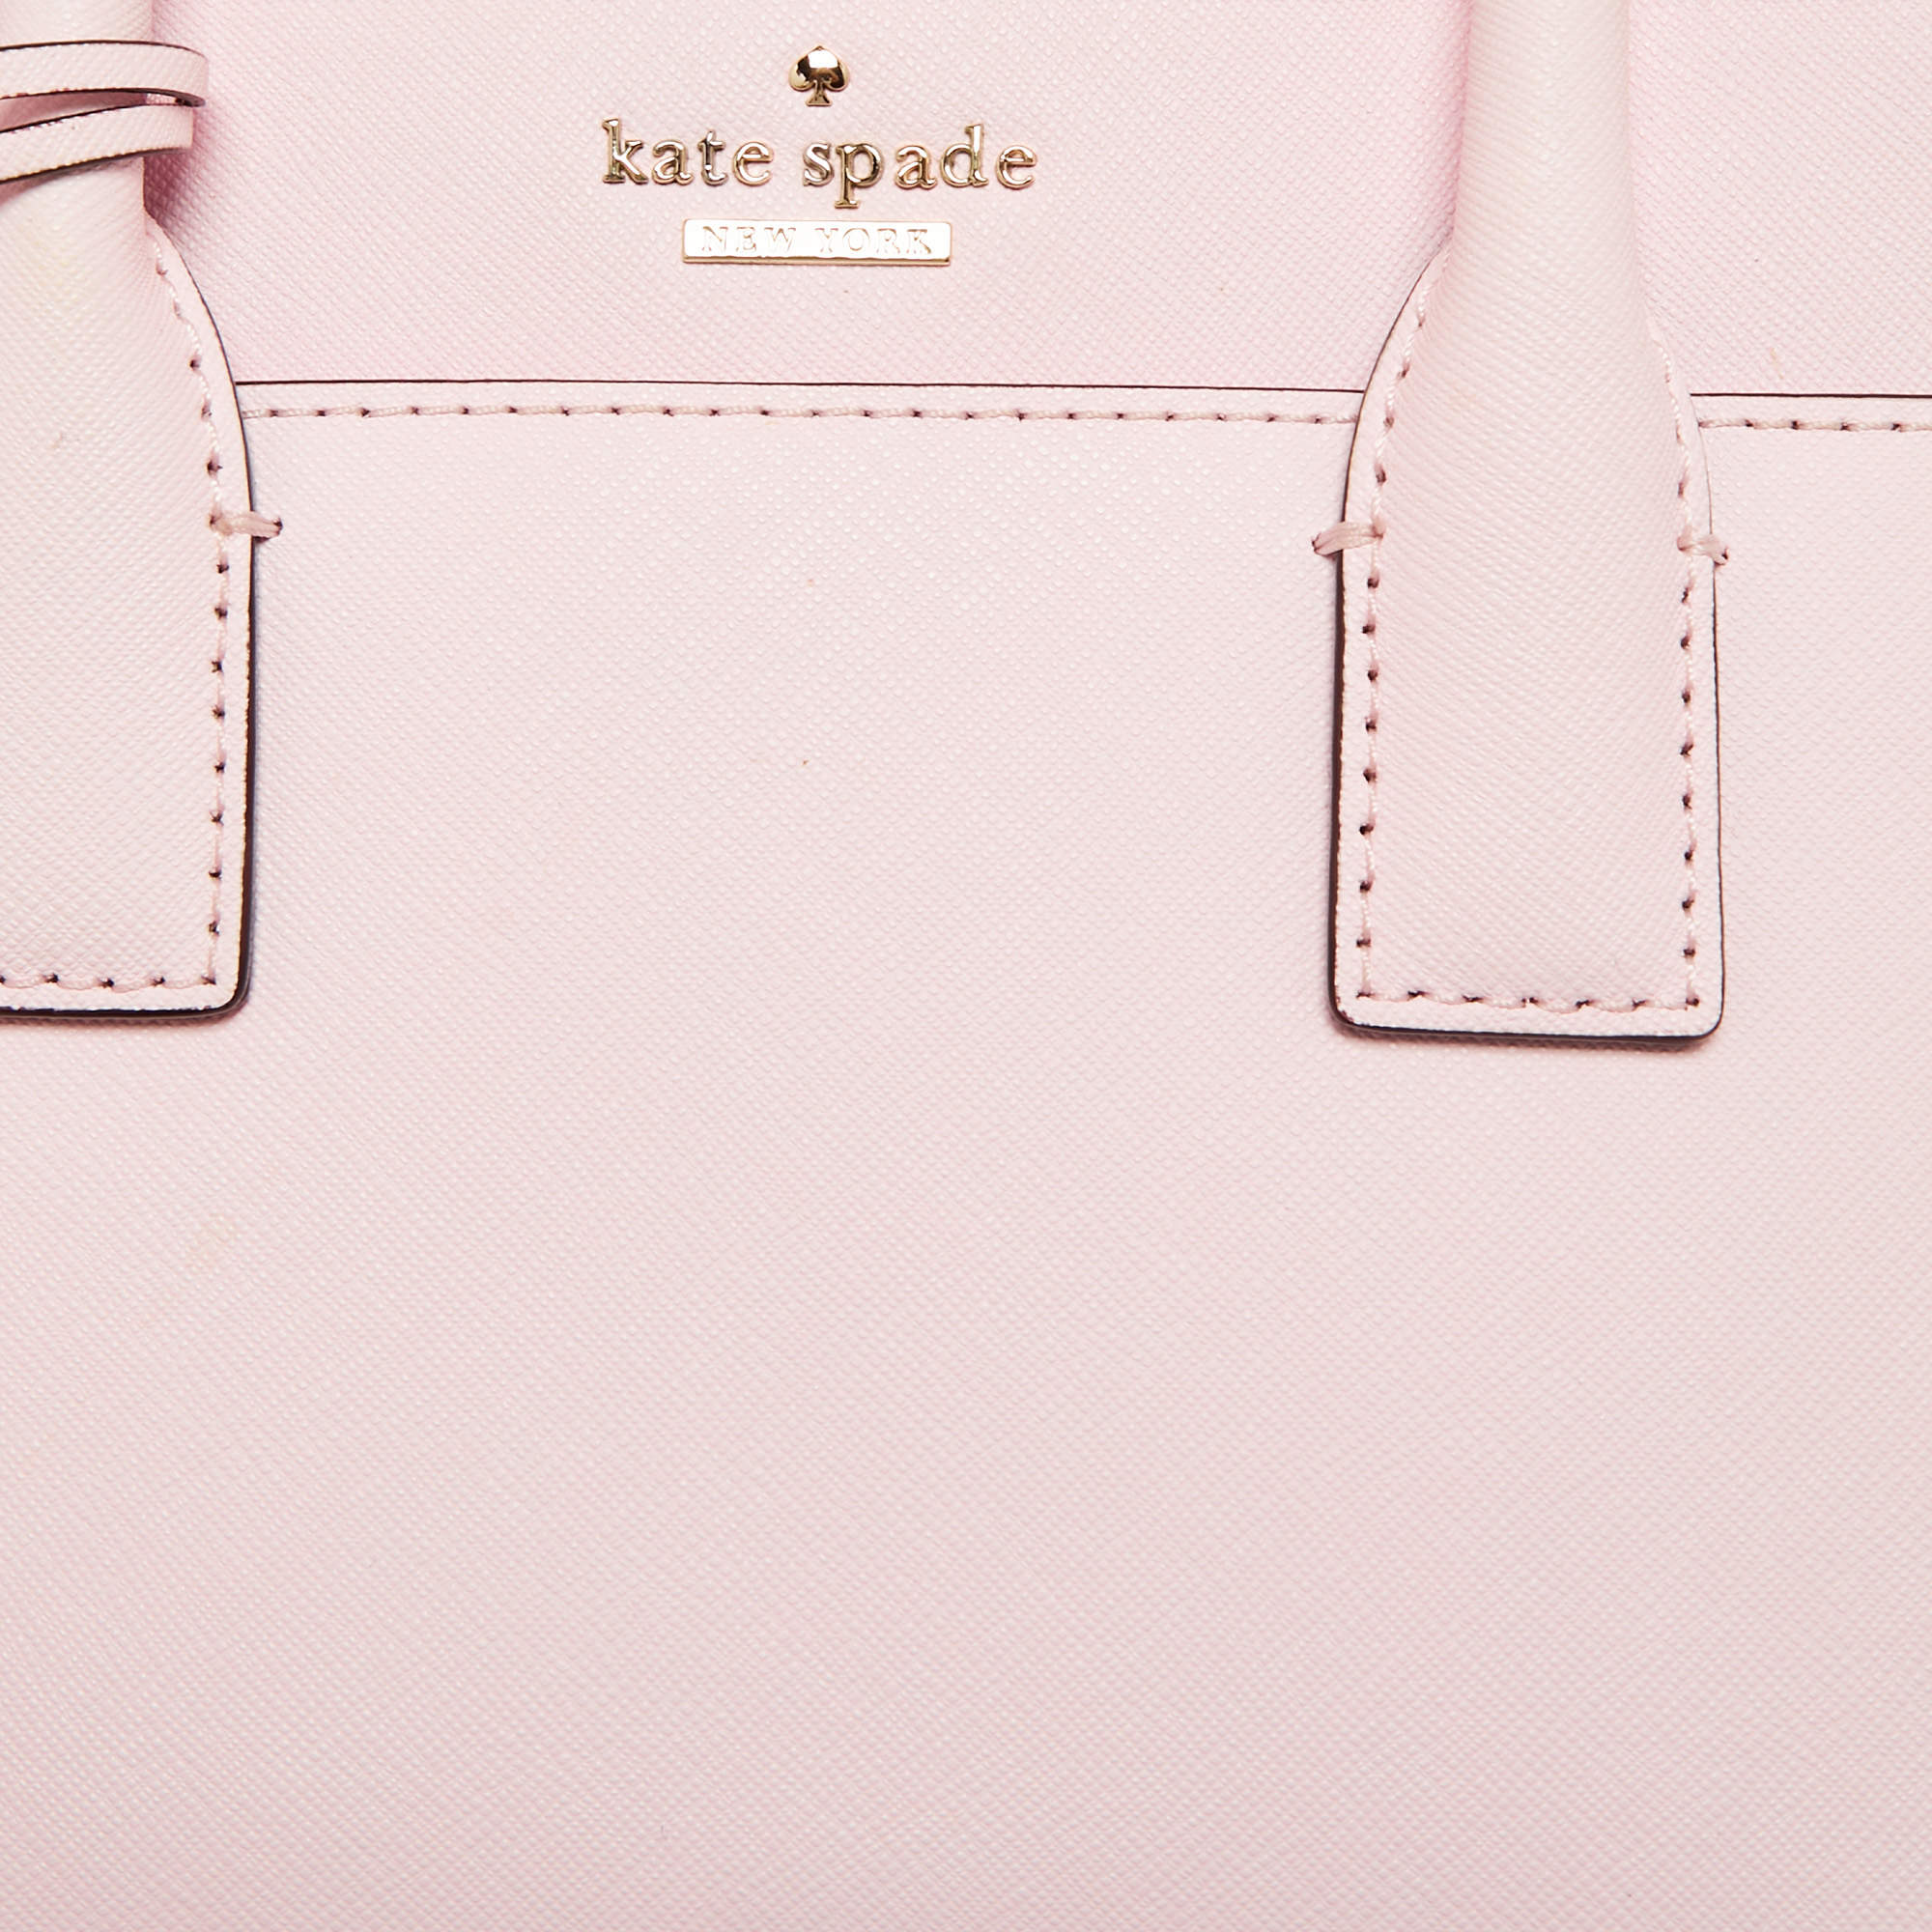 Kate Spade New York Pink Sunset Cameron Street Large Lucie Leather Tote, Best Price and Reviews